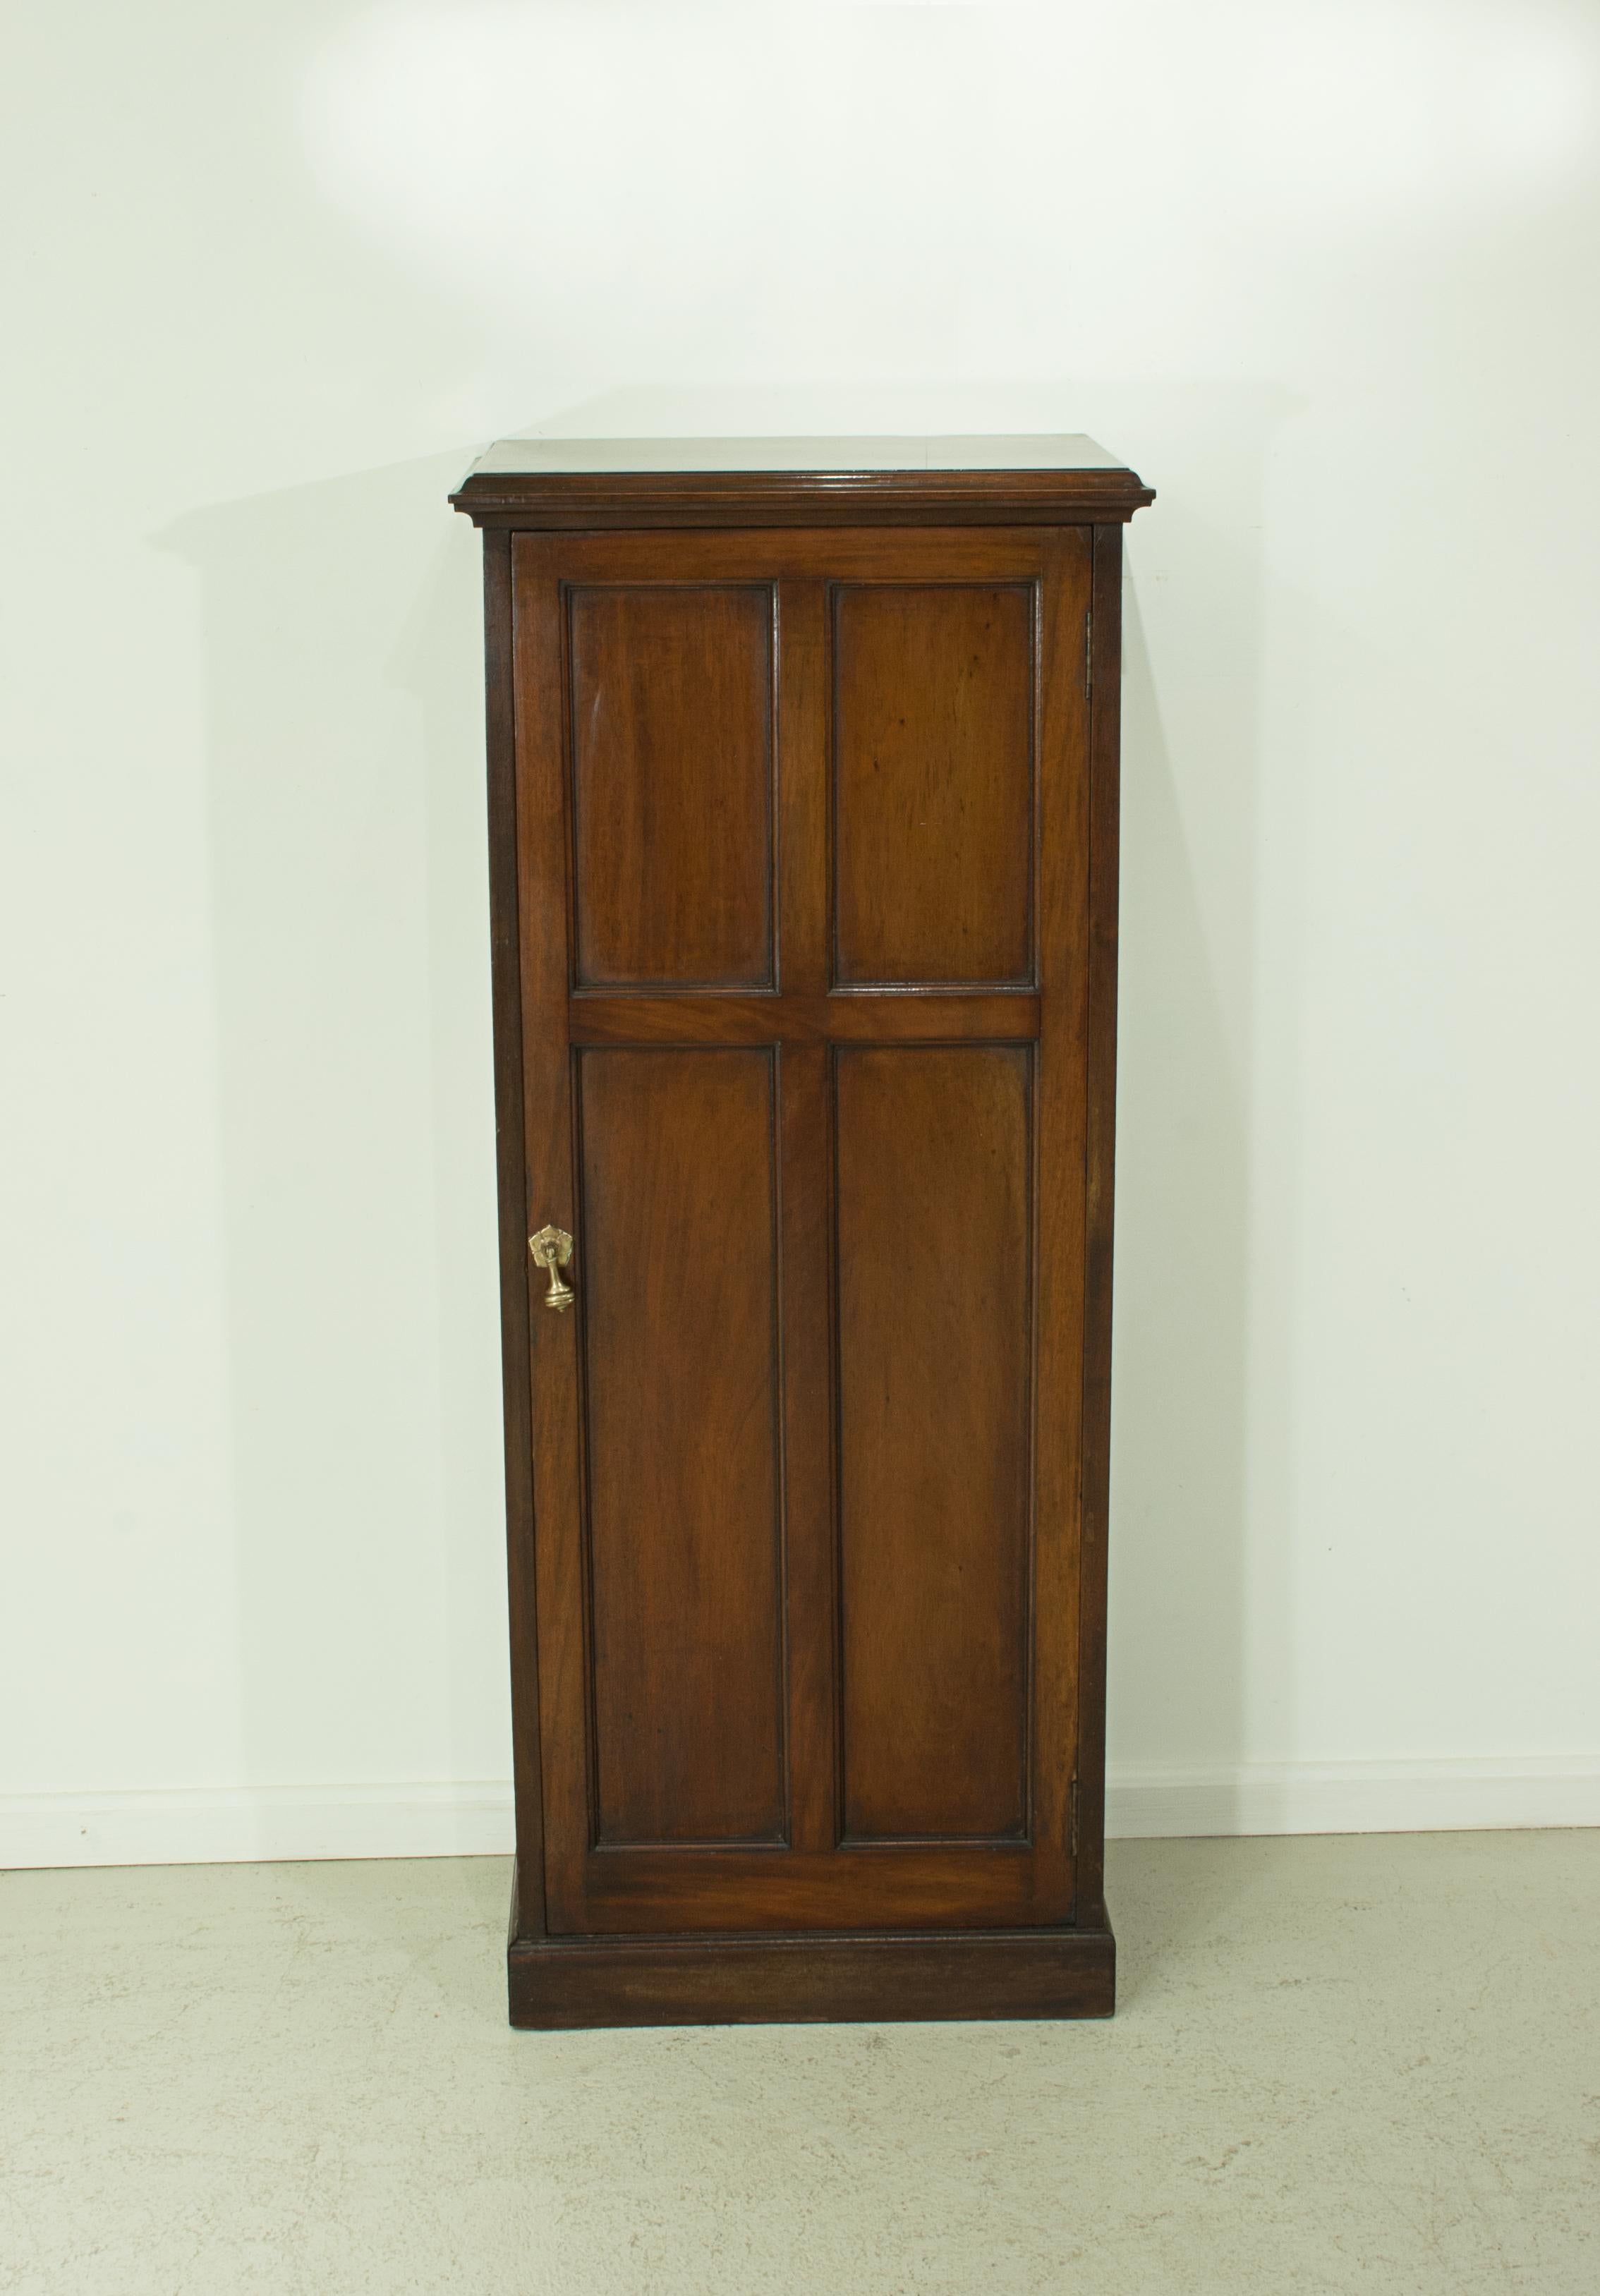 British Antique Mahogany Shoe Cabinet of Good Proportions and Paneled Door